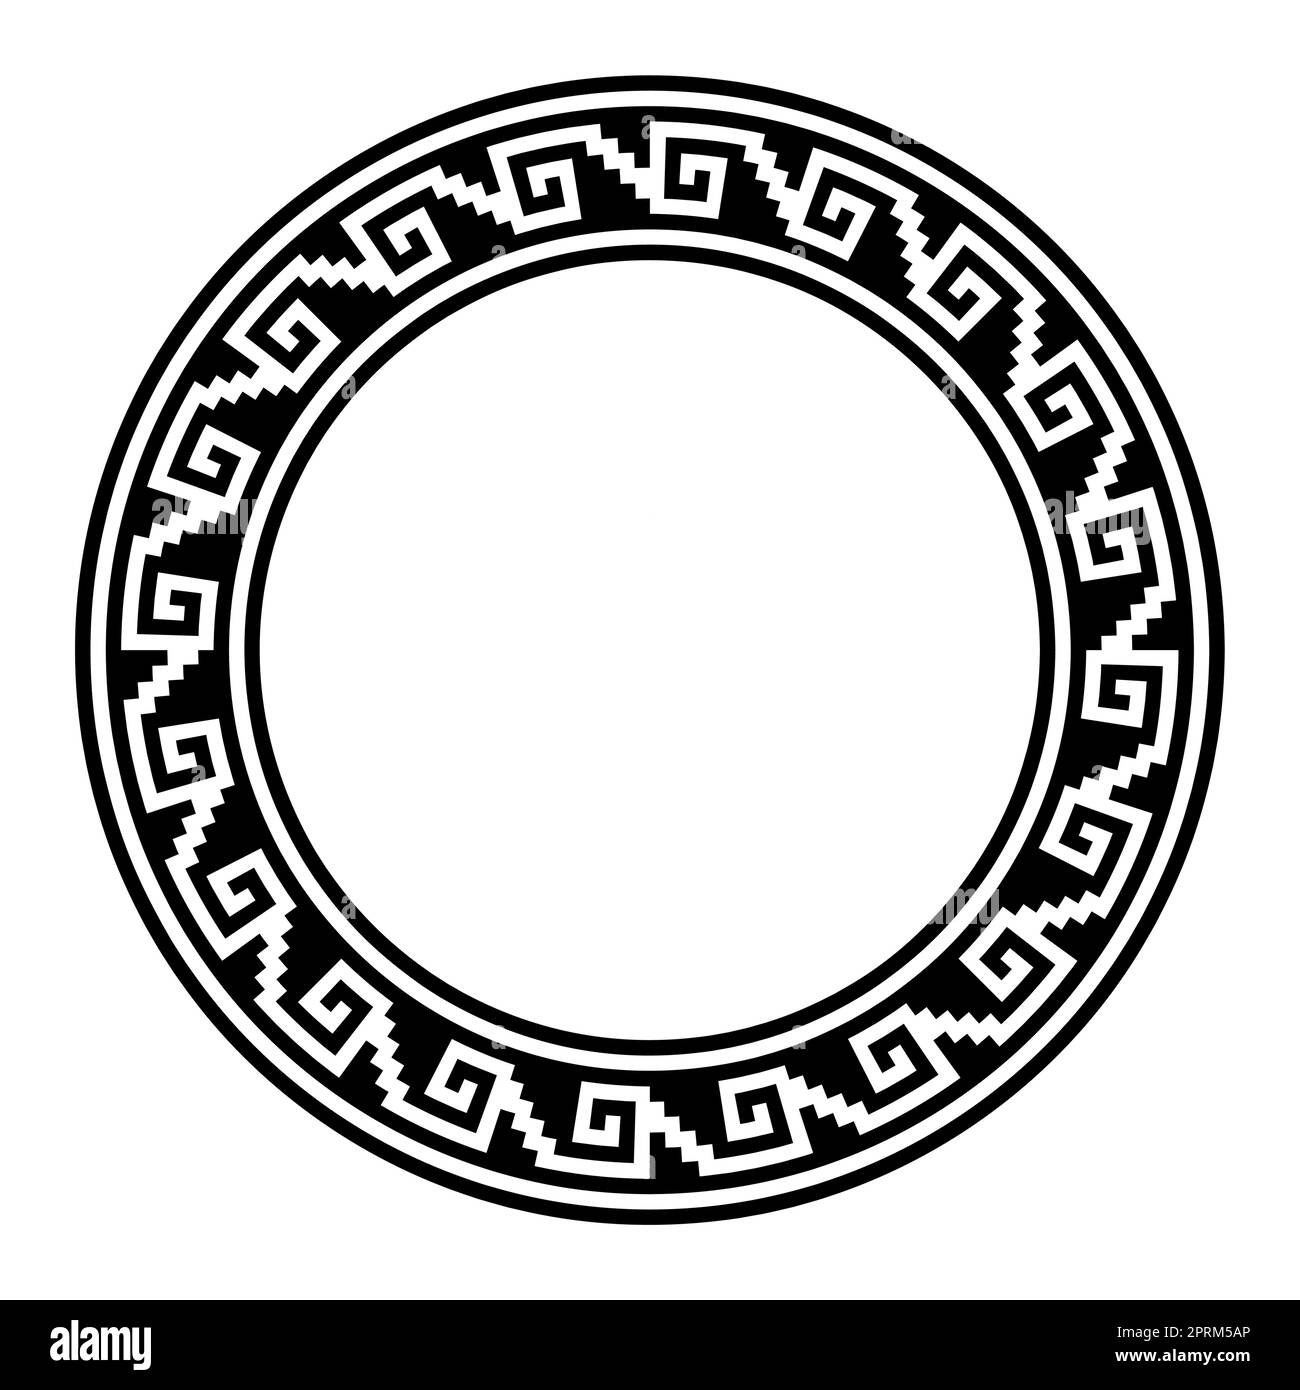 Aztec stepped fret motif, circle frame with meander pattern Stock Vector